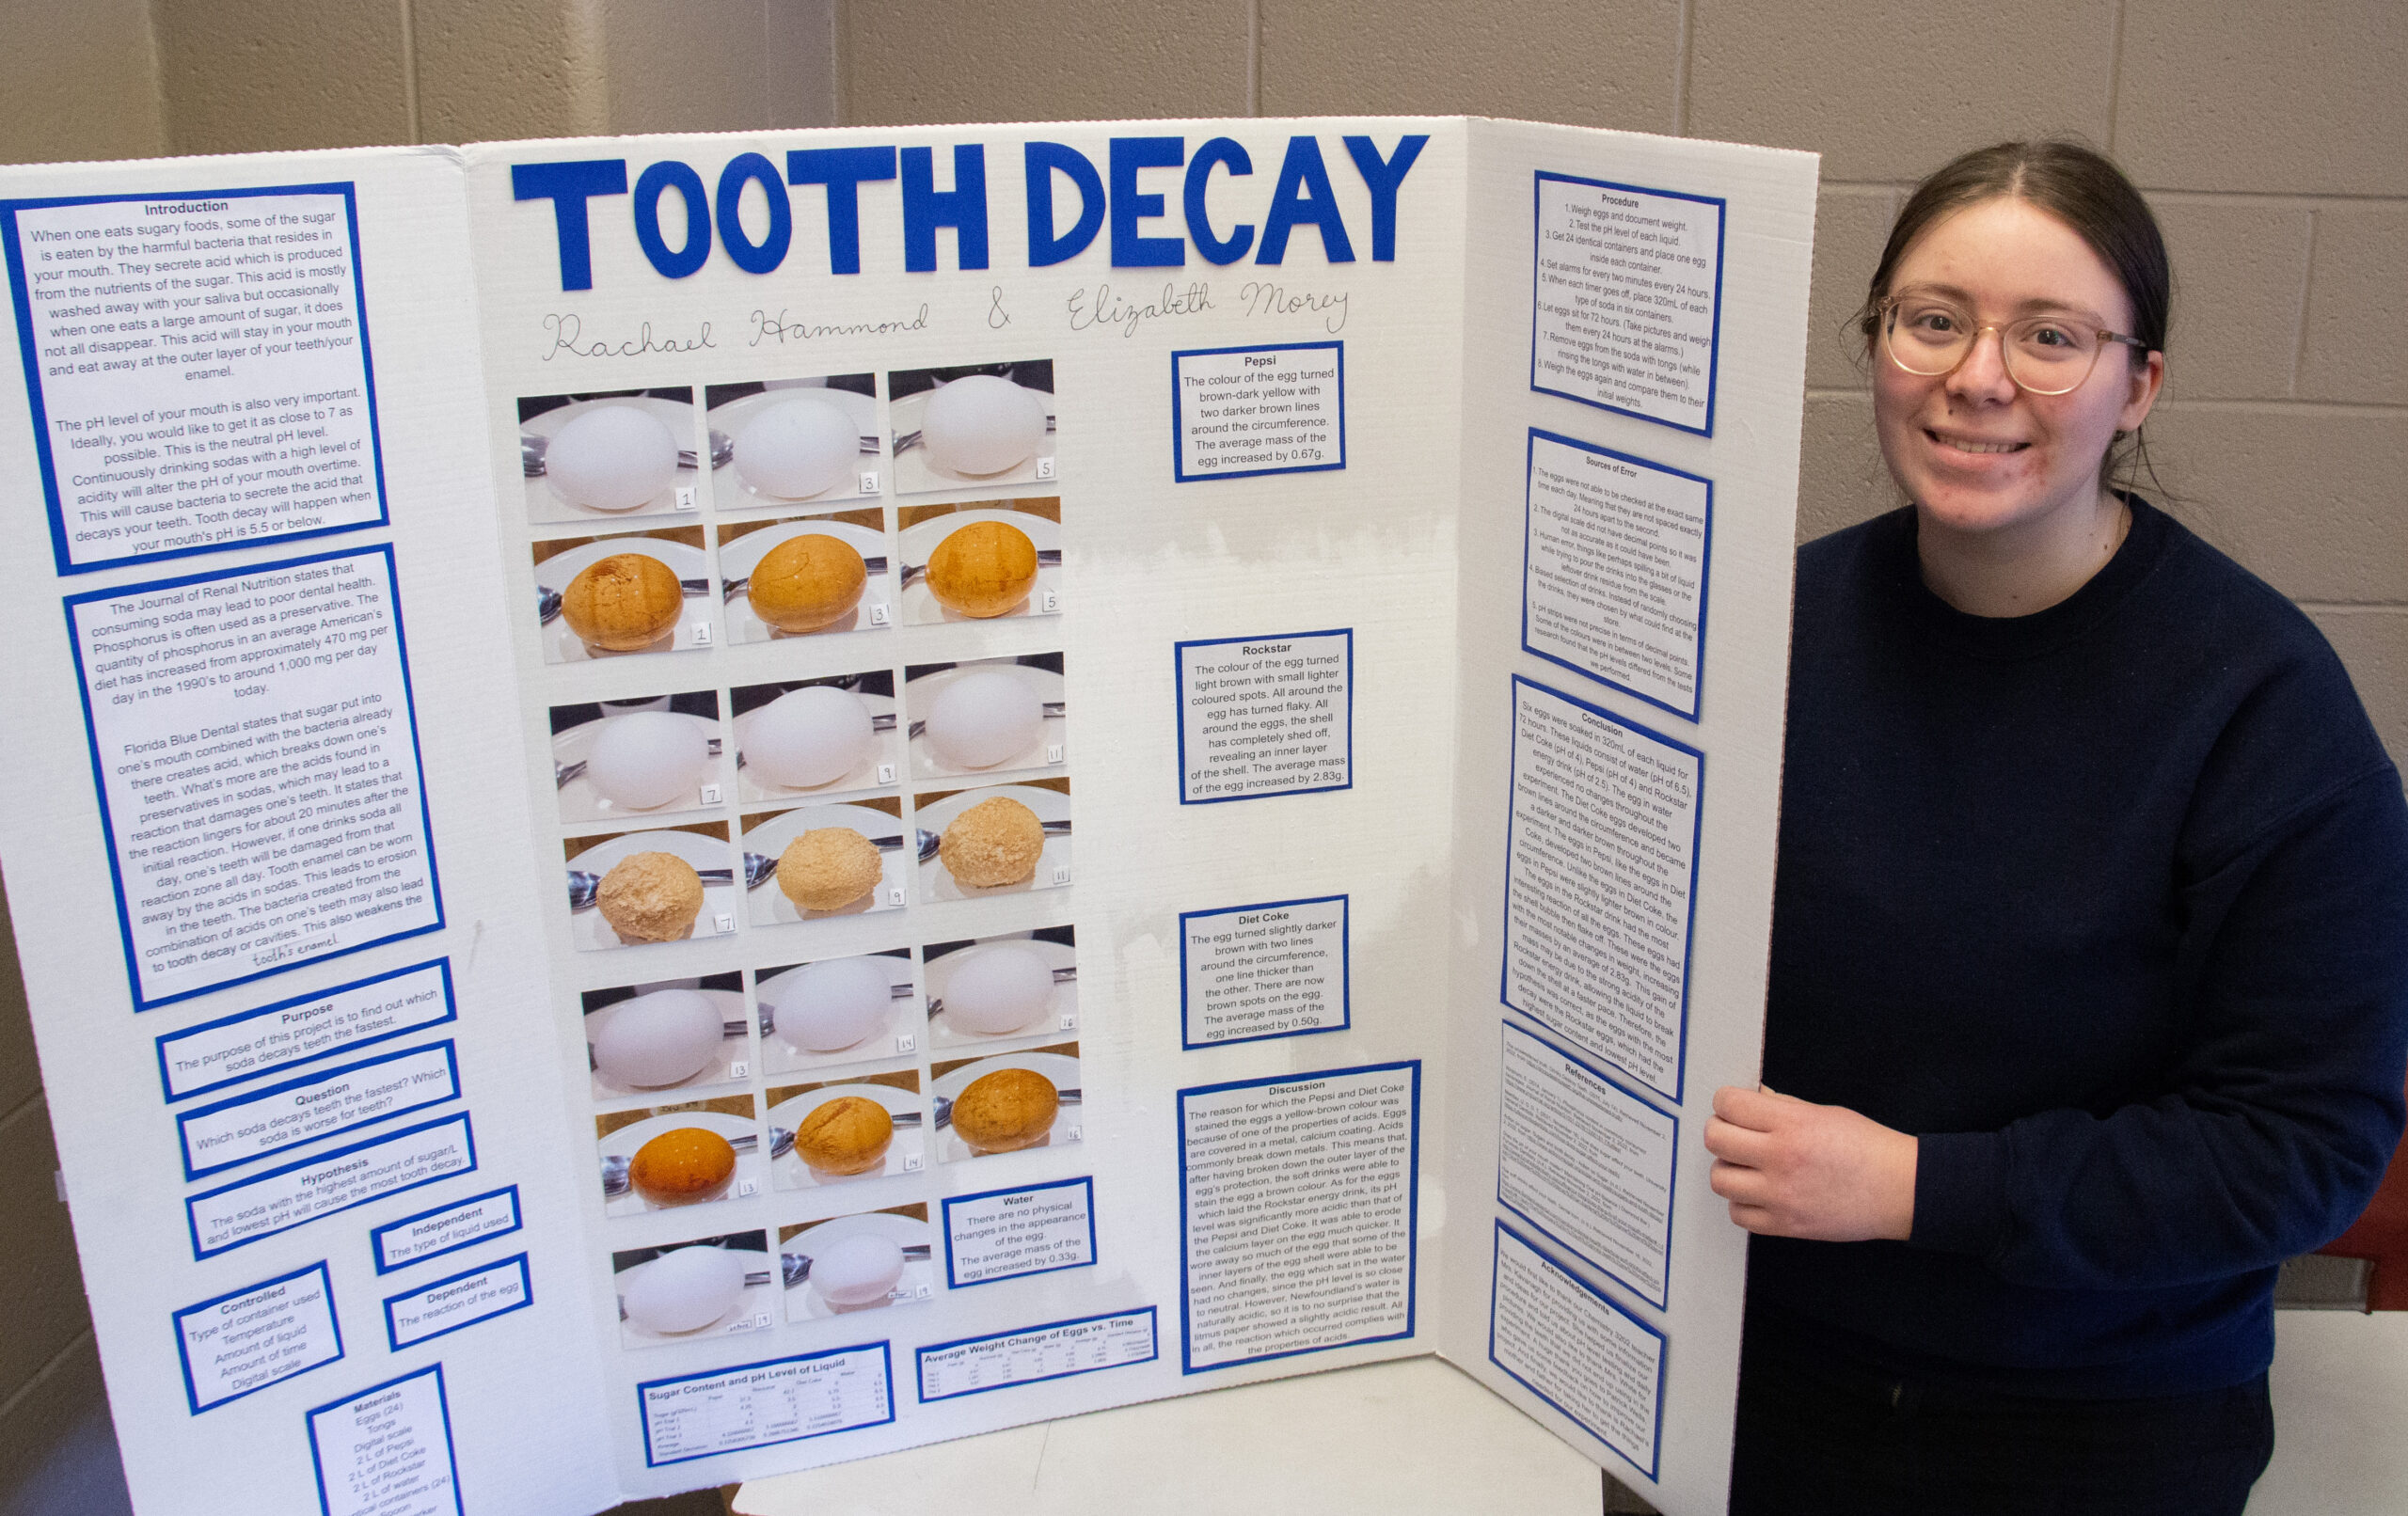 Rachael Hammond stands holding a poster board filled with text and photos of her project titled "tooth decay"